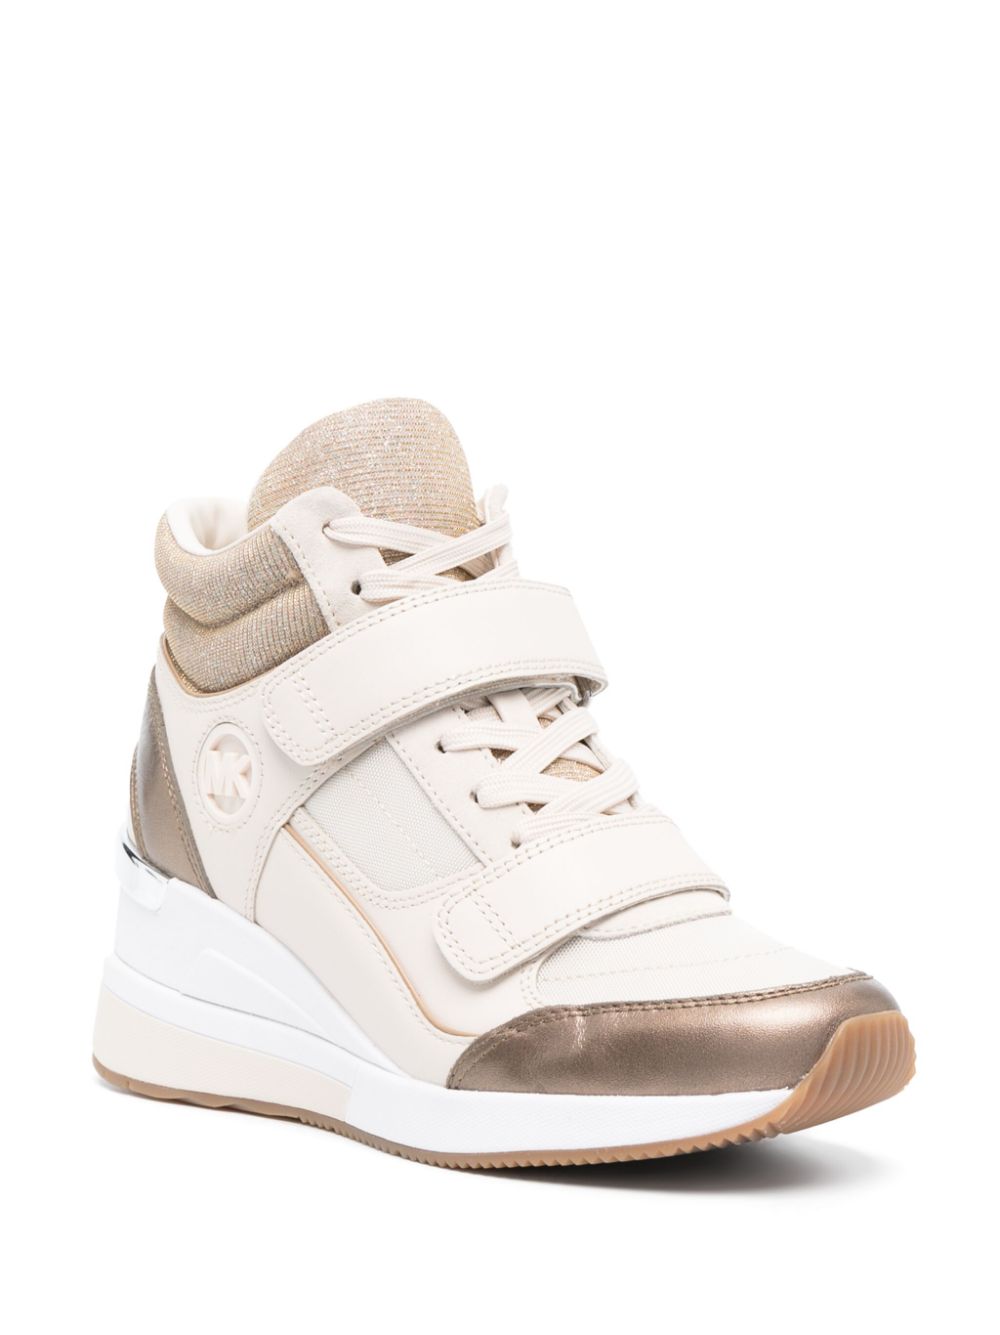 Michael Michael Kors Gentry high-top Leather Sneakers - Farfetch